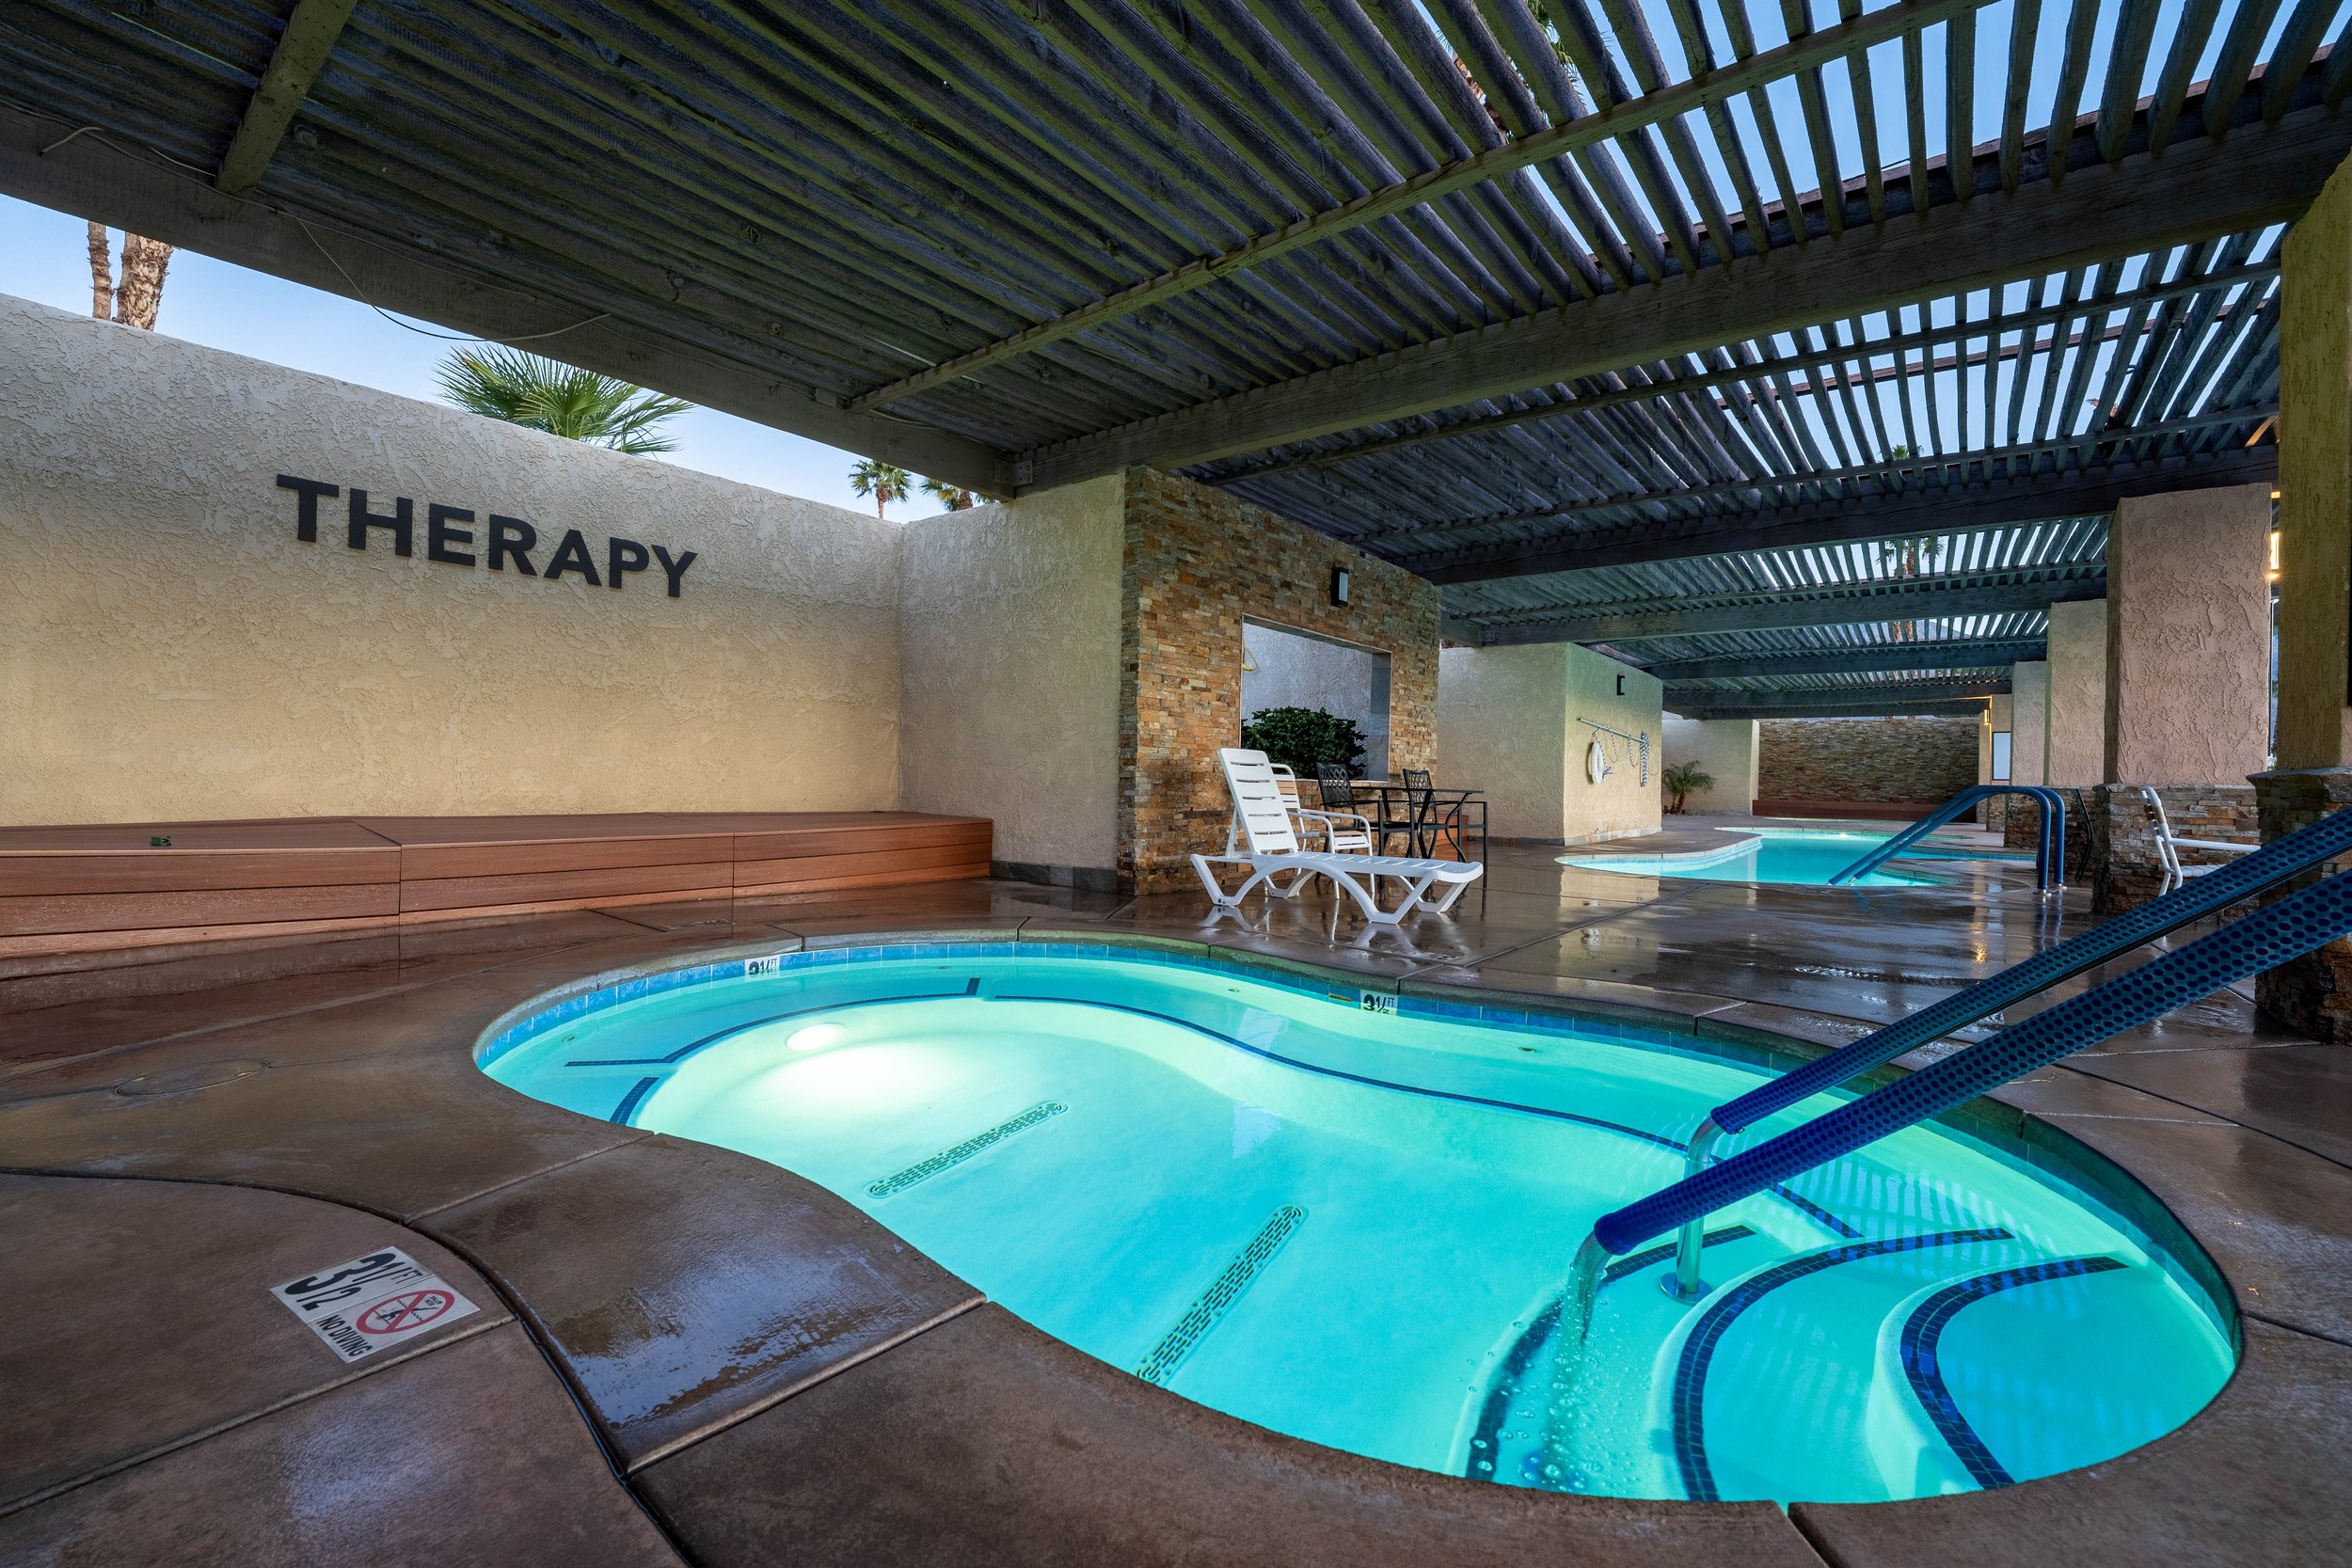 Sky Valley Mineral Pools Therapy Pool.jpg